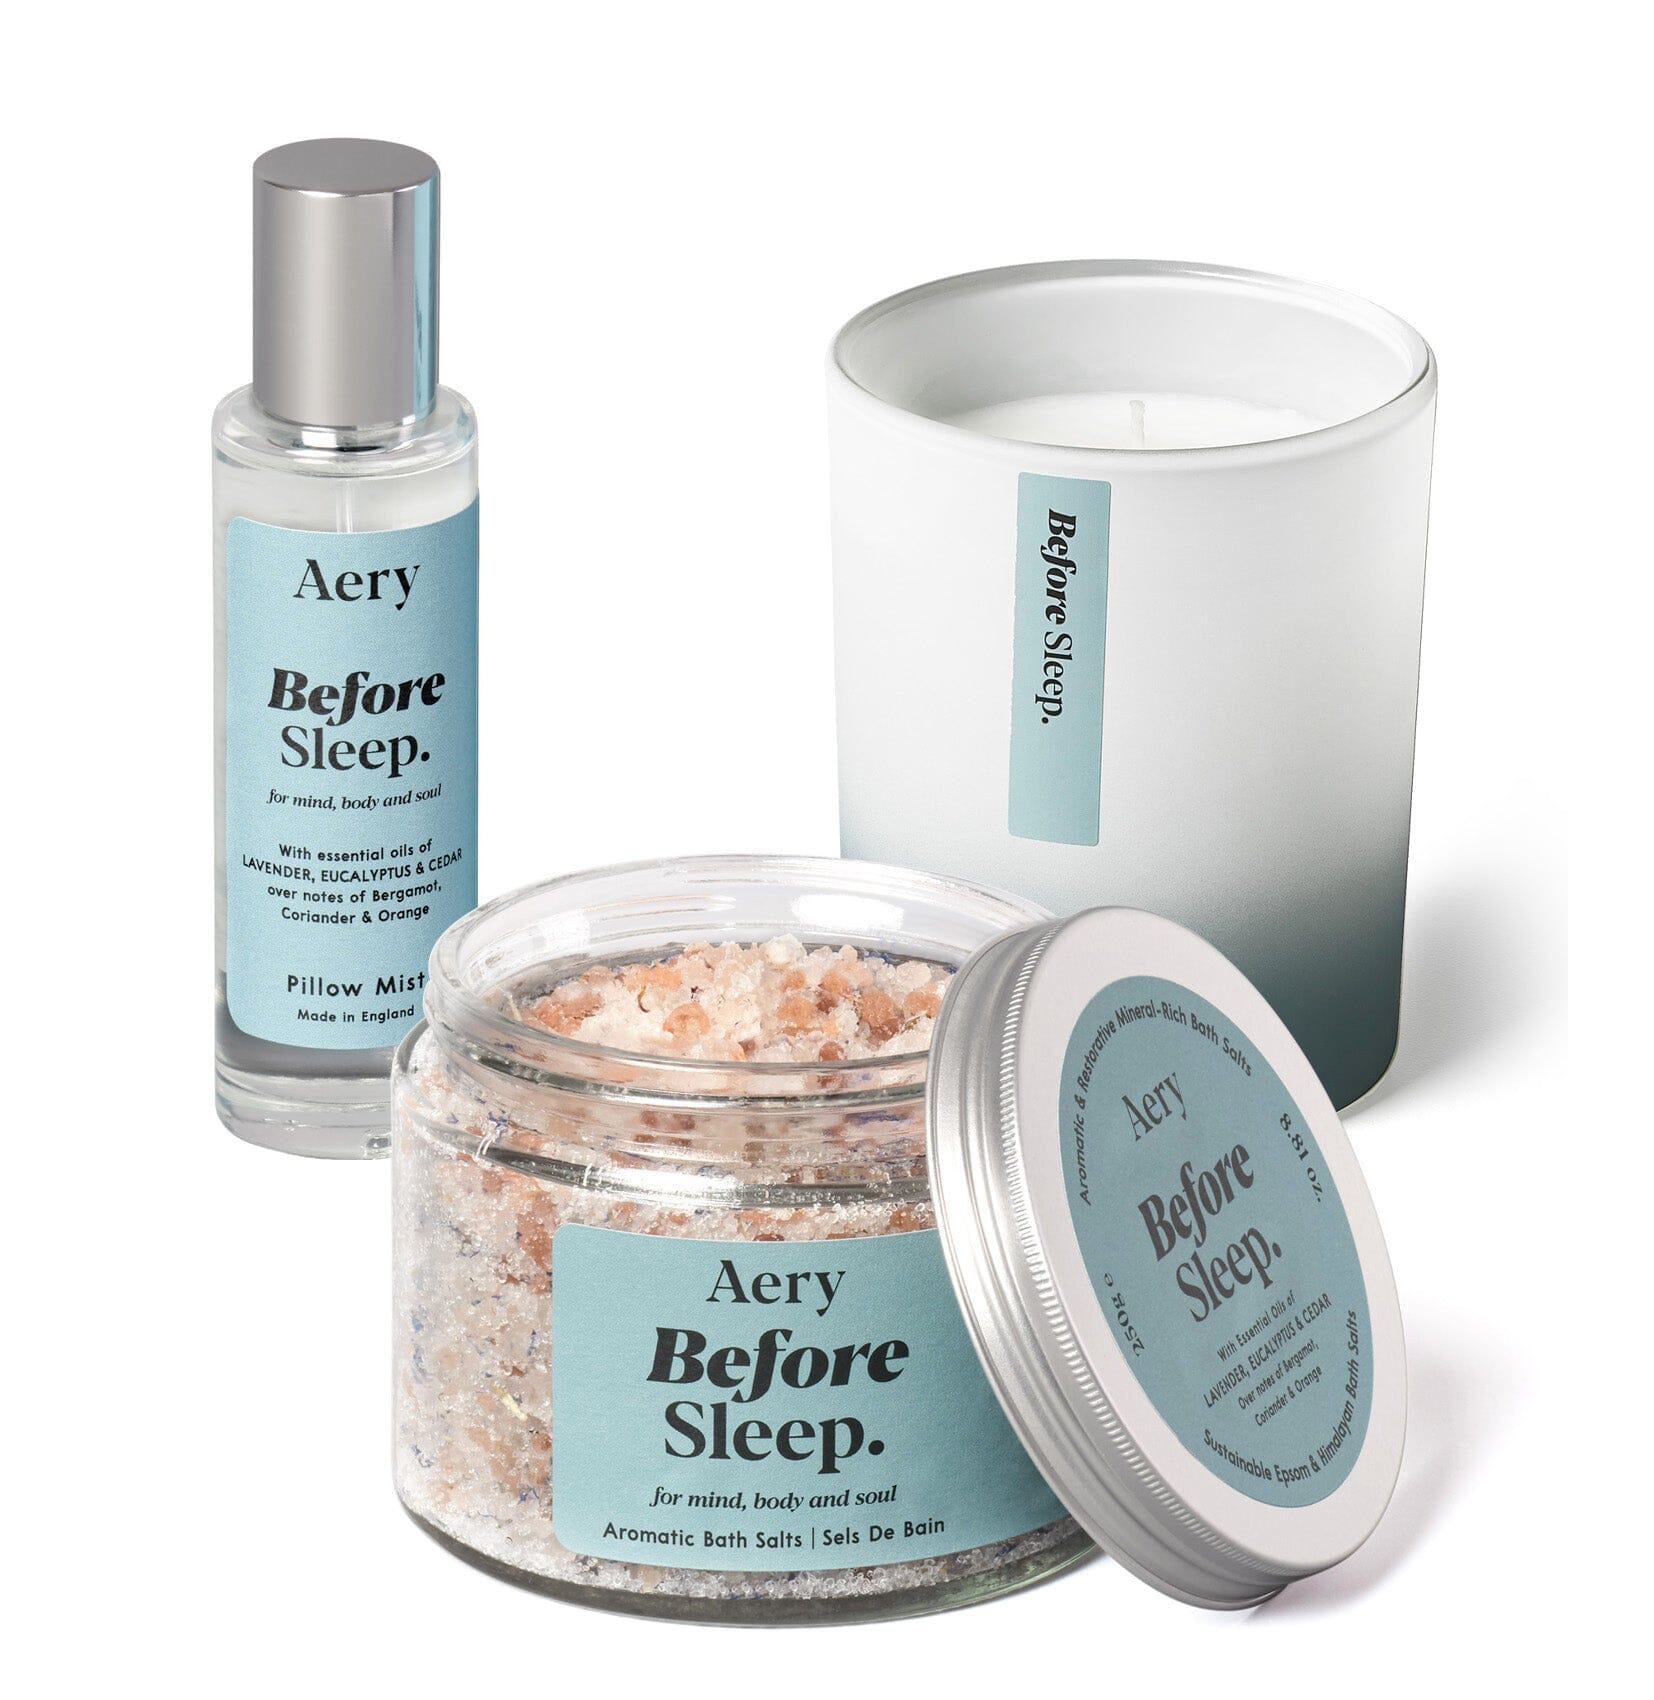 Blue before sleep bundle with candle pillow spray and bath salts on white background 